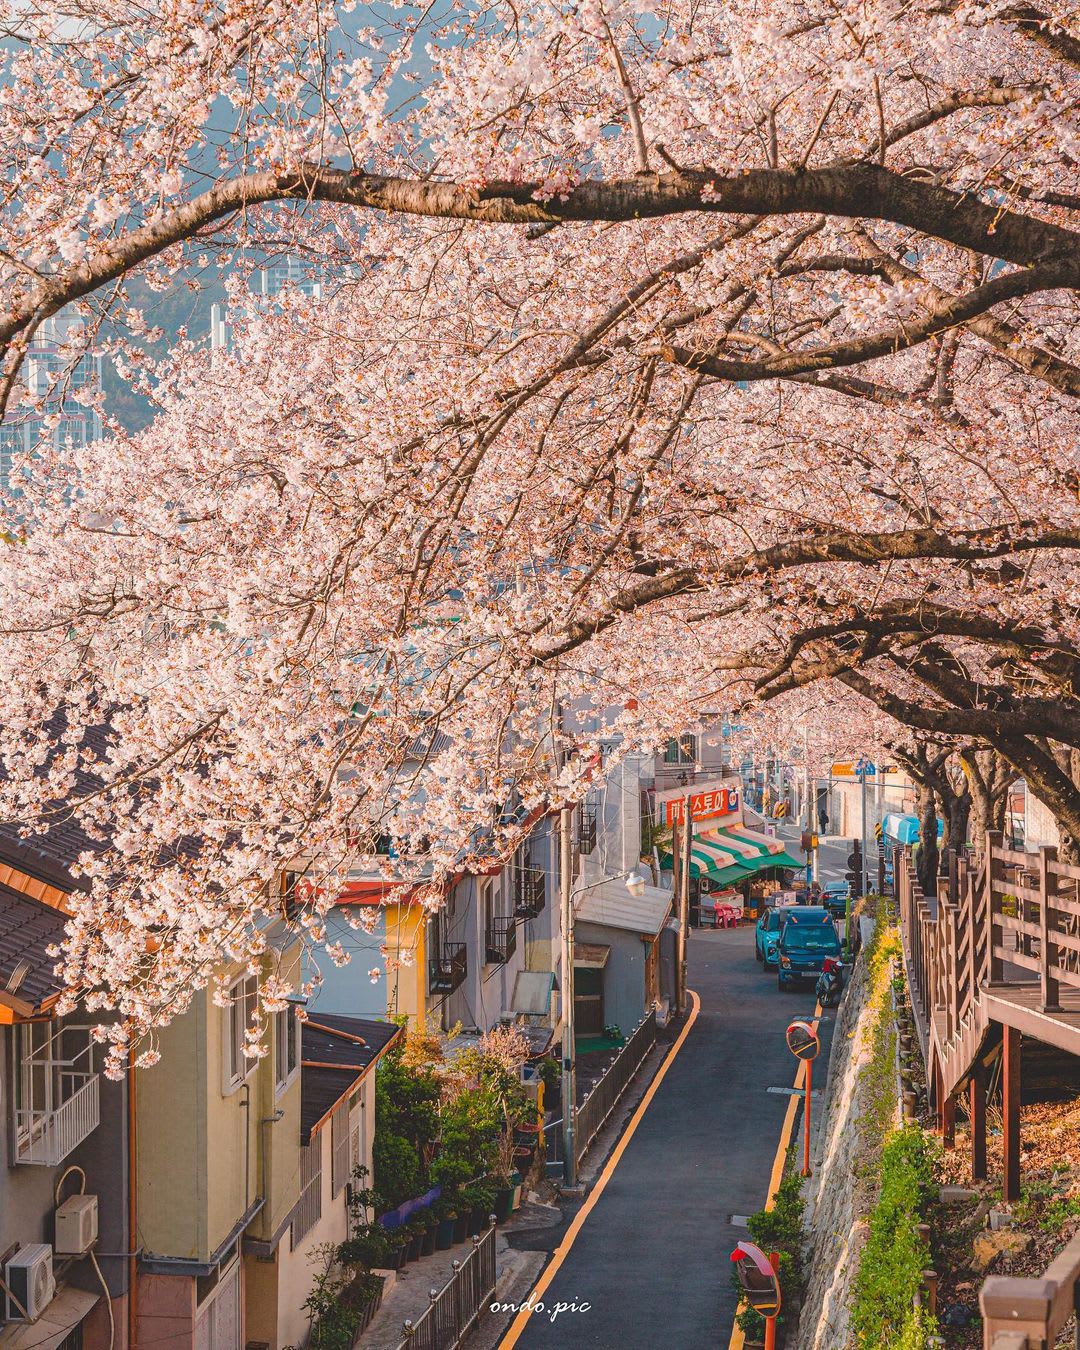 A tunnel of cherry blossoms over a street in a hilly neighborhood, Busan, South Korea.